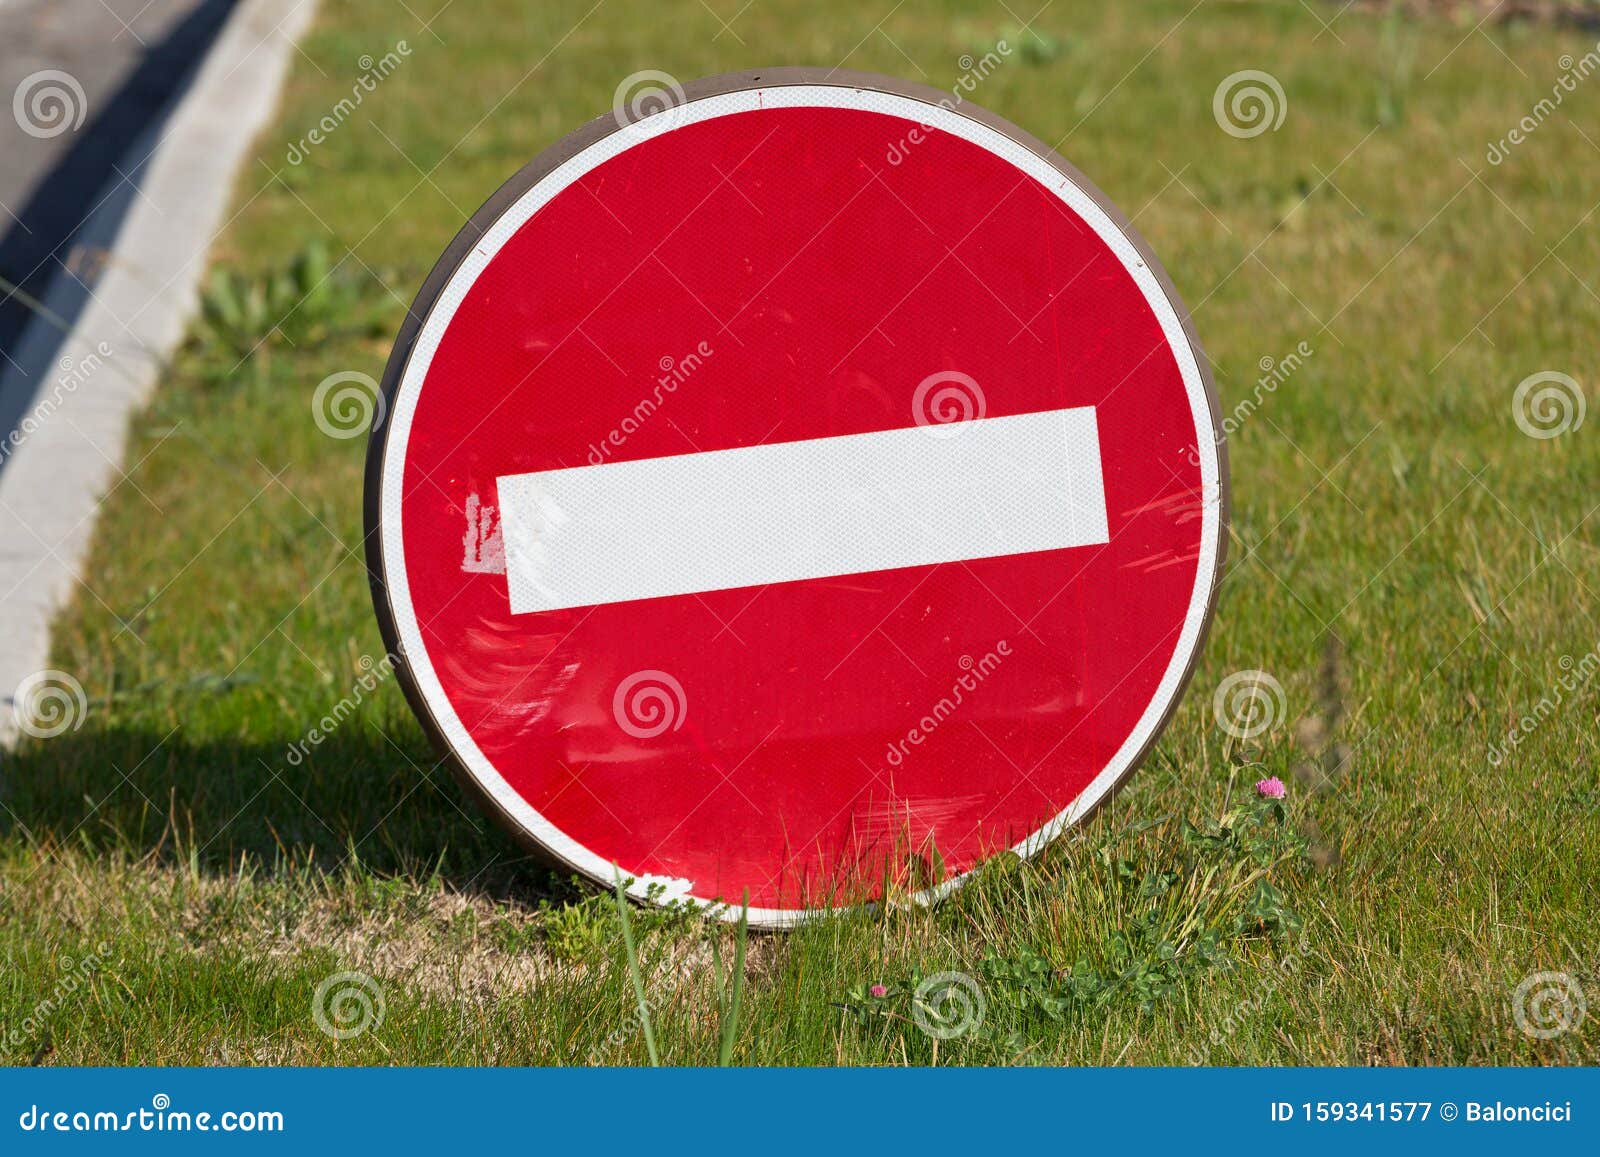 No Exceptions Stock Photos - Free & Royalty-Free Stock Photos from  Dreamstime